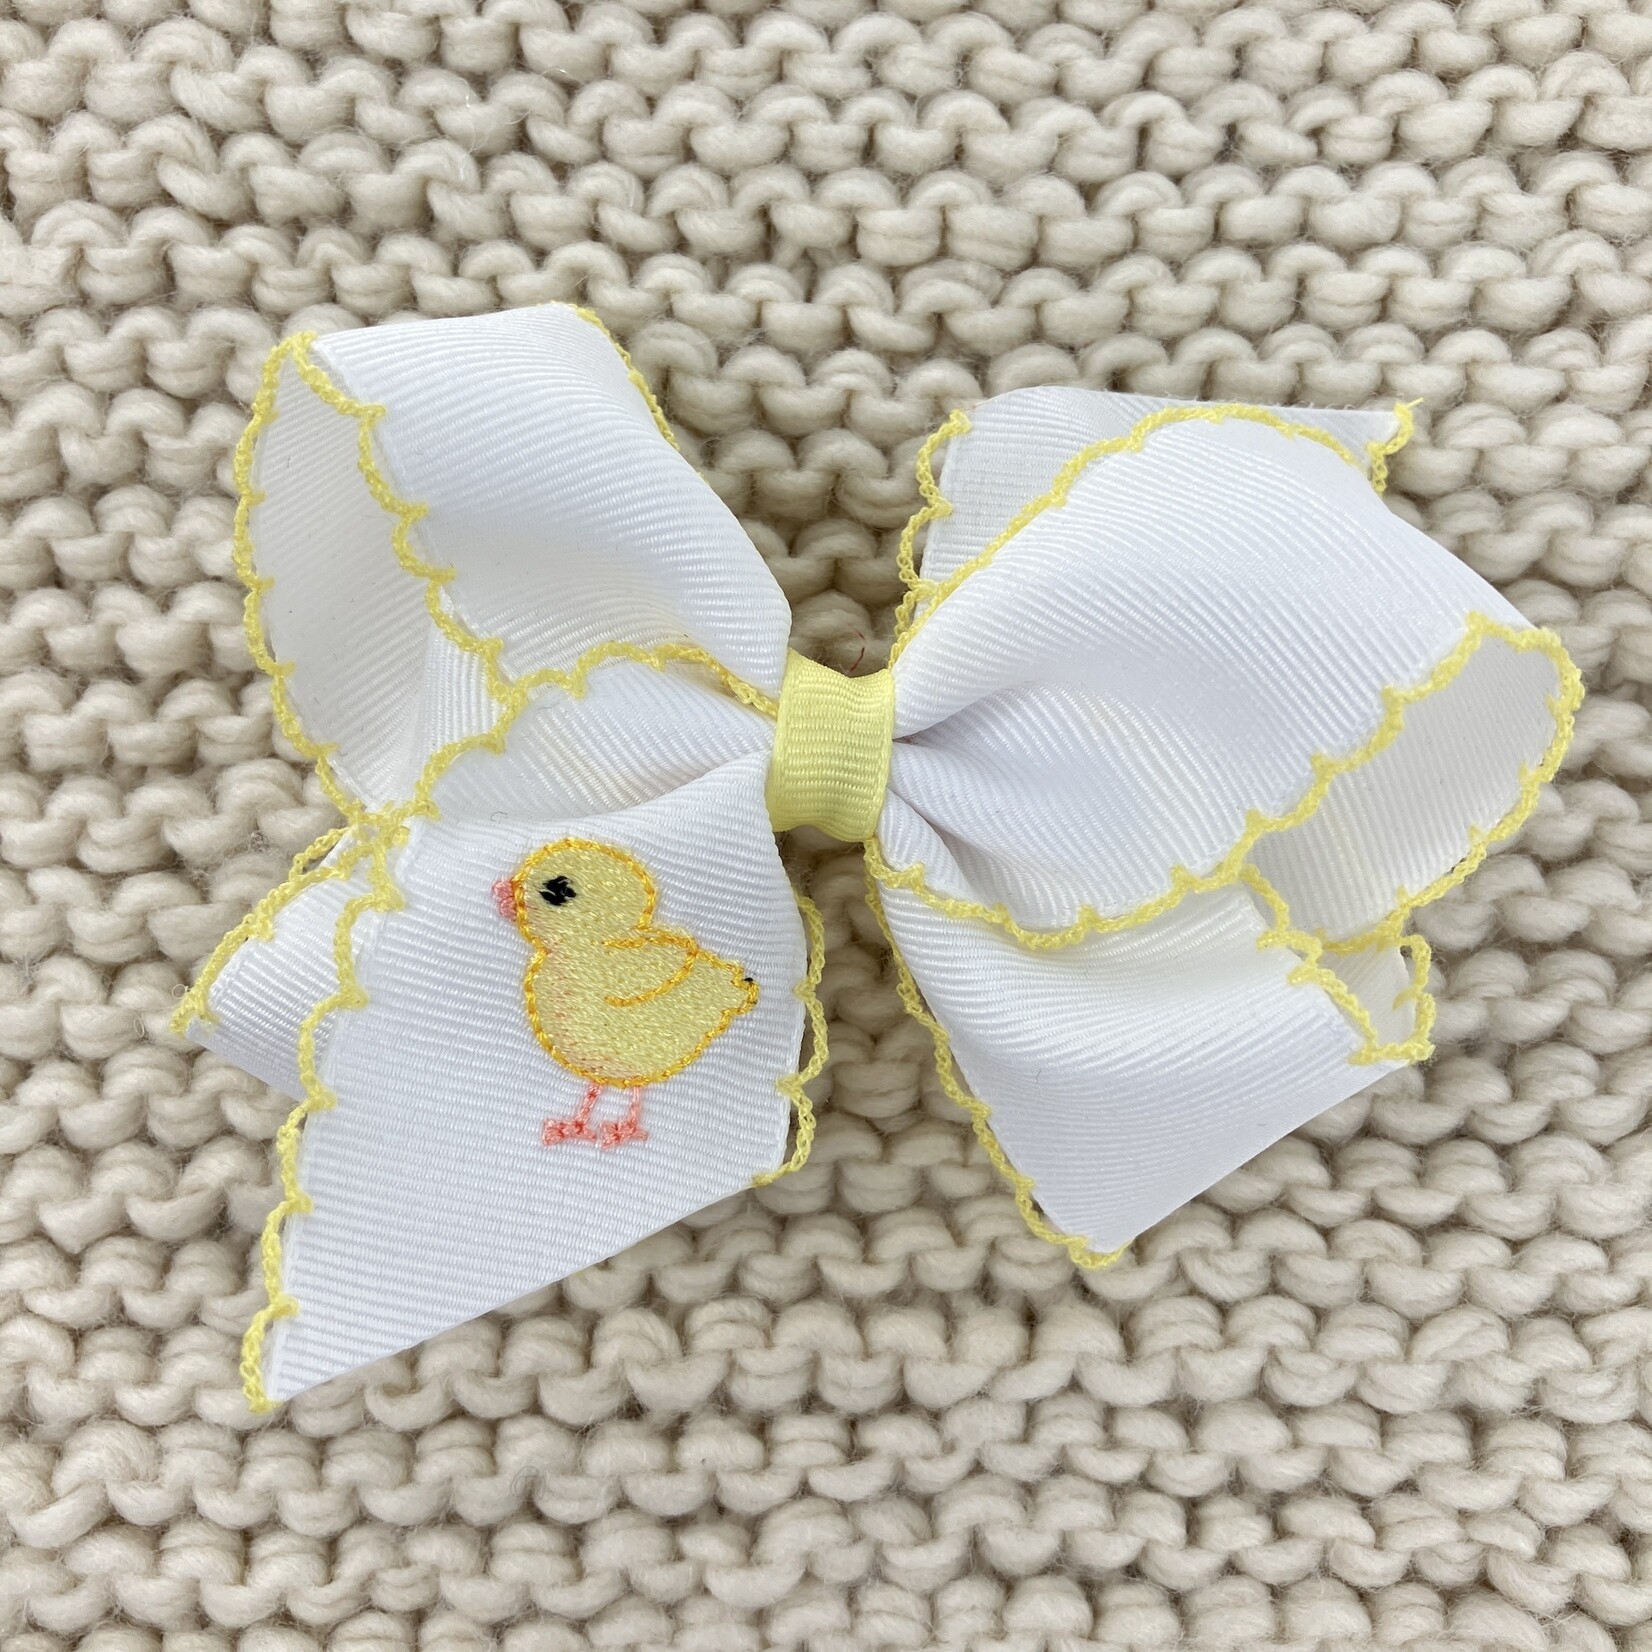 WEE ONES Medium Grosgrain Bow with Moonstitch Edge and Easter-inspired Embroidery on Tail